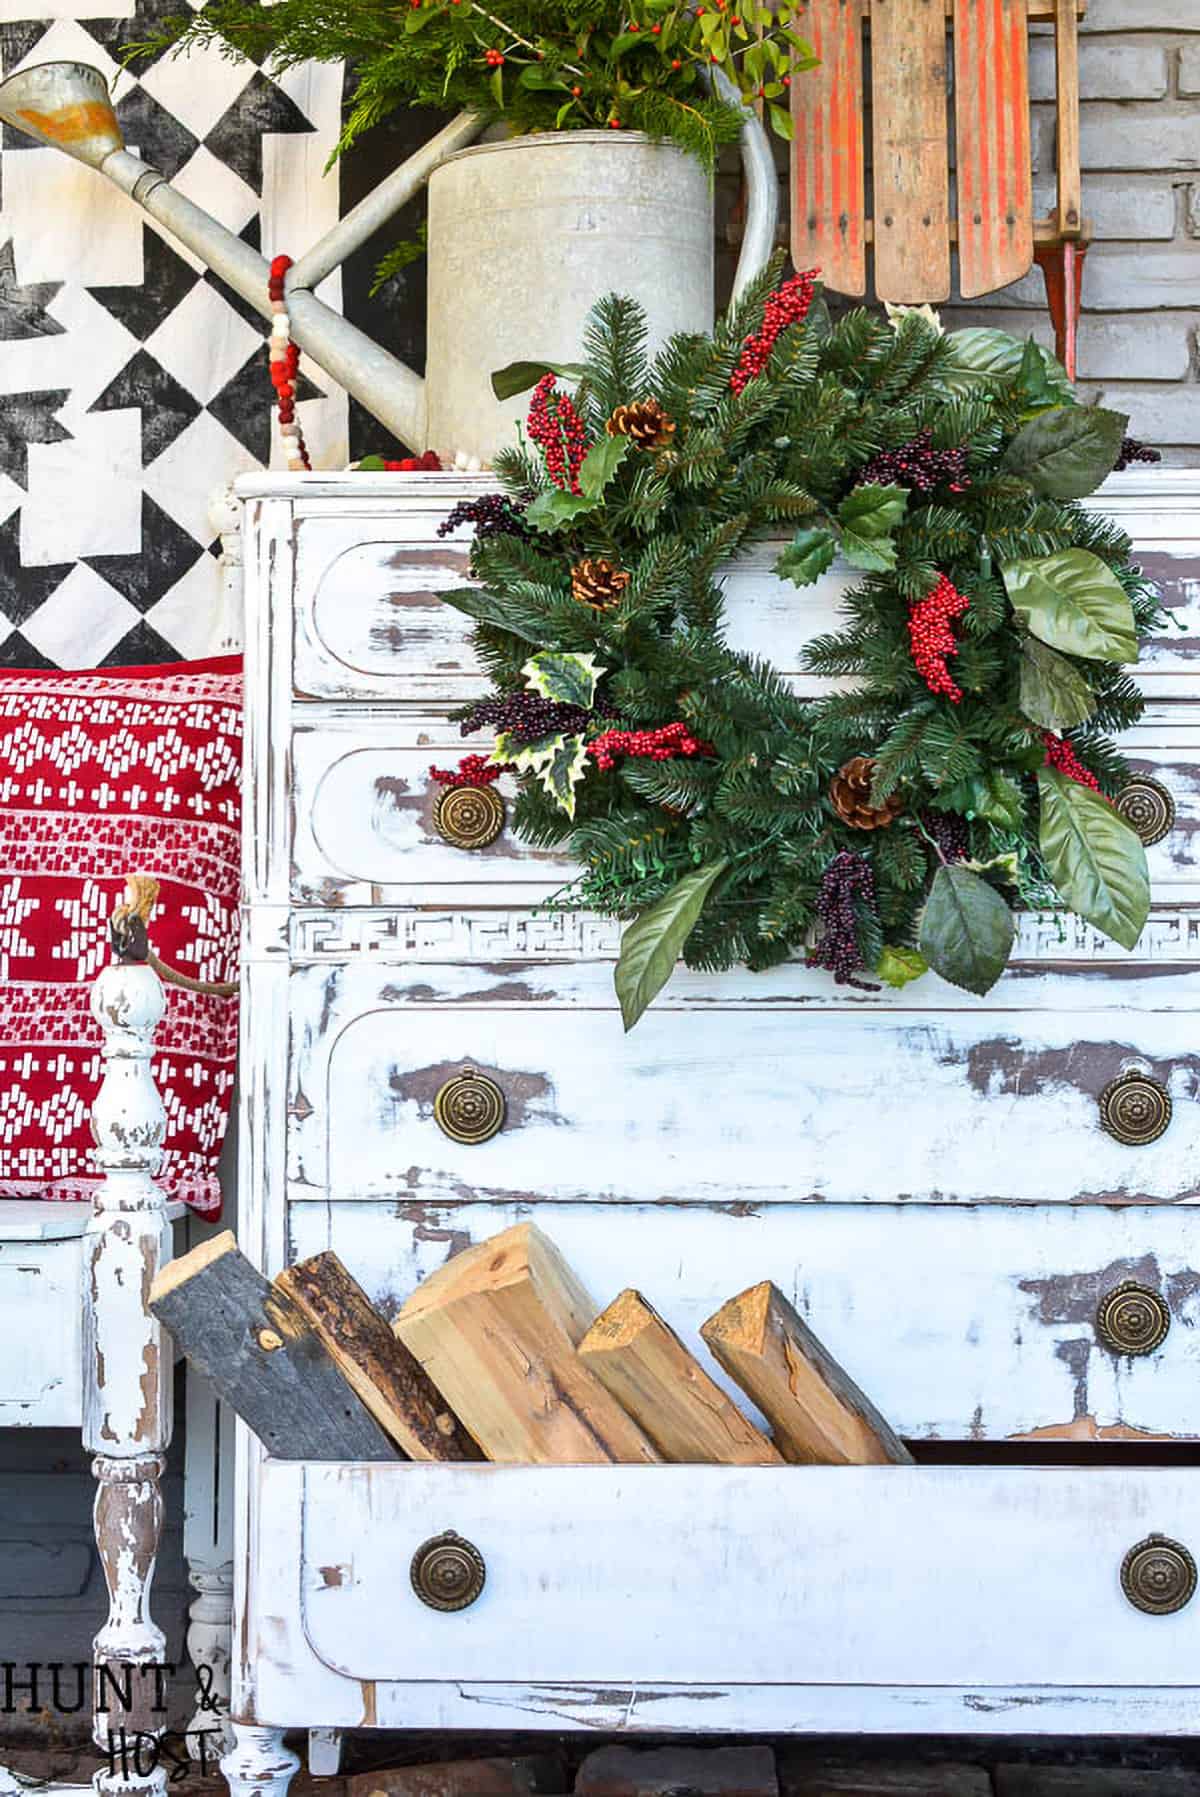 A distressed white dresser outside with a wreath on it and firewood in one drawer.